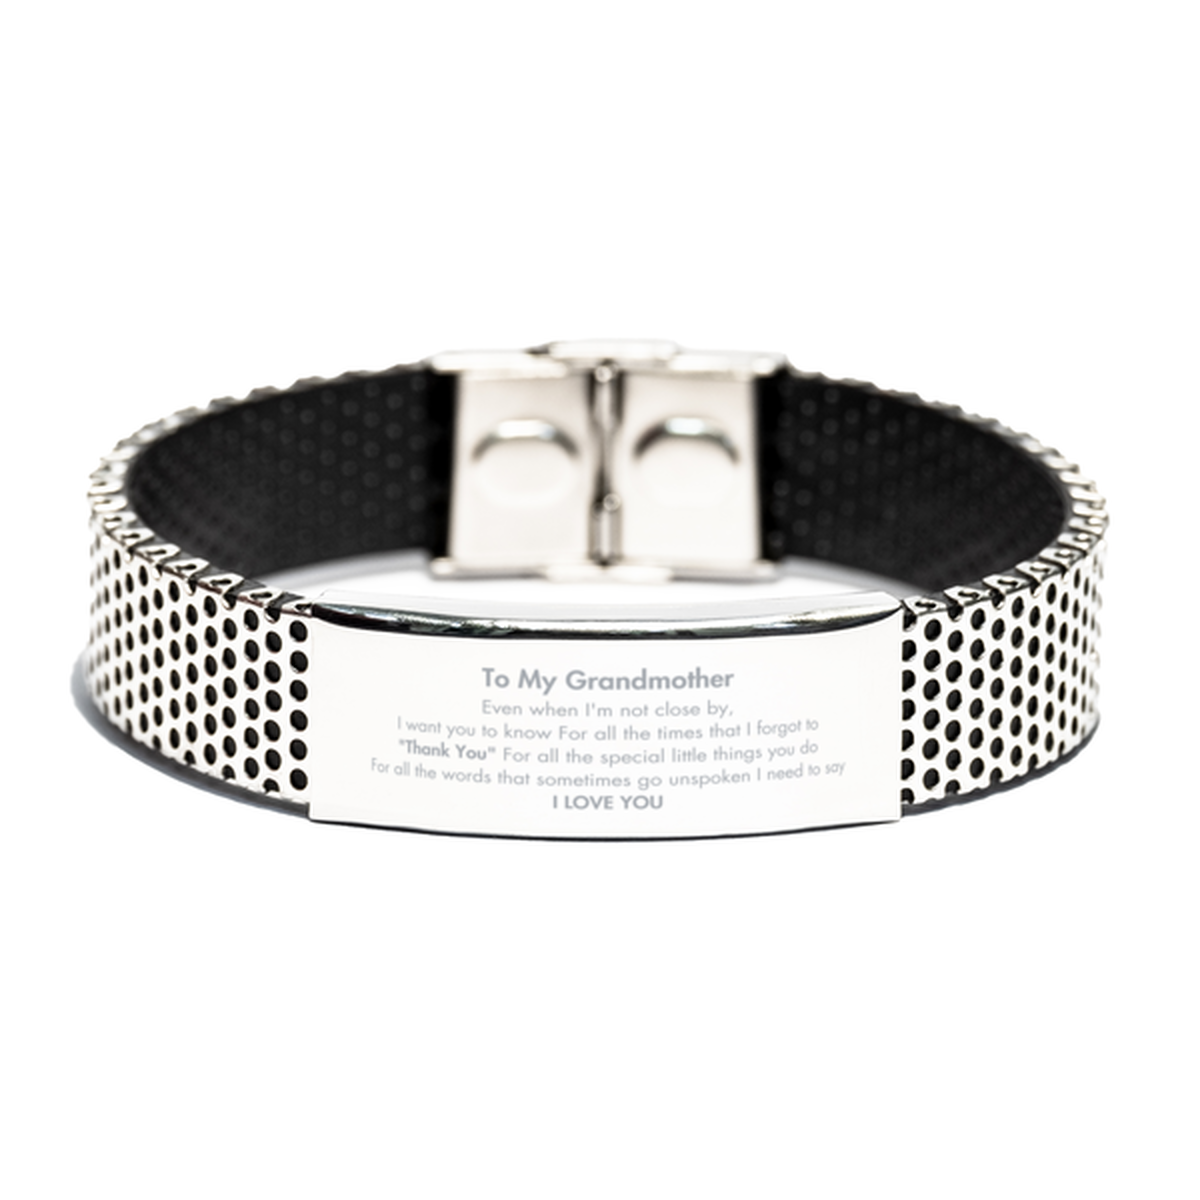 Thank You Gifts for Grandmother, Keepsake Stainless Steel Bracelet Gifts for Grandmother Birthday Mother's day Father's Day Grandmother For all the words That sometimes go unspoken I need to say I LOVE YOU